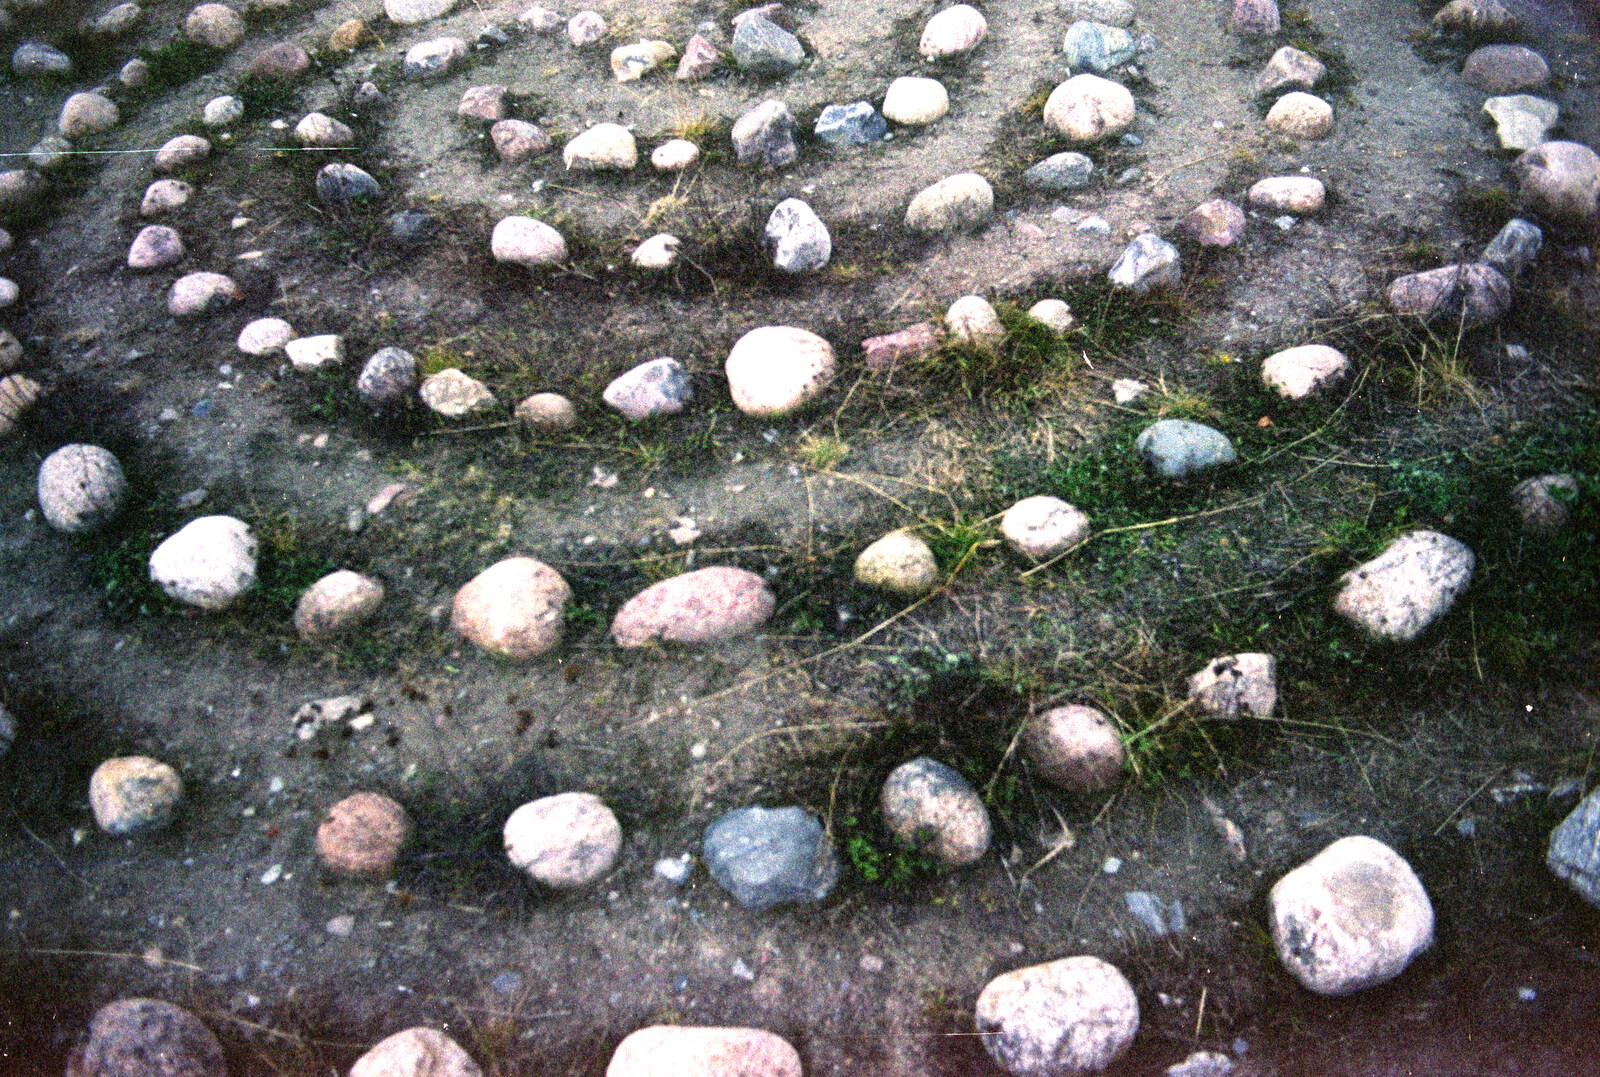 Pebble circle from A Trip to Rovaniemi and the Arctic Circle, Lapland, Finland - 28th November 1999